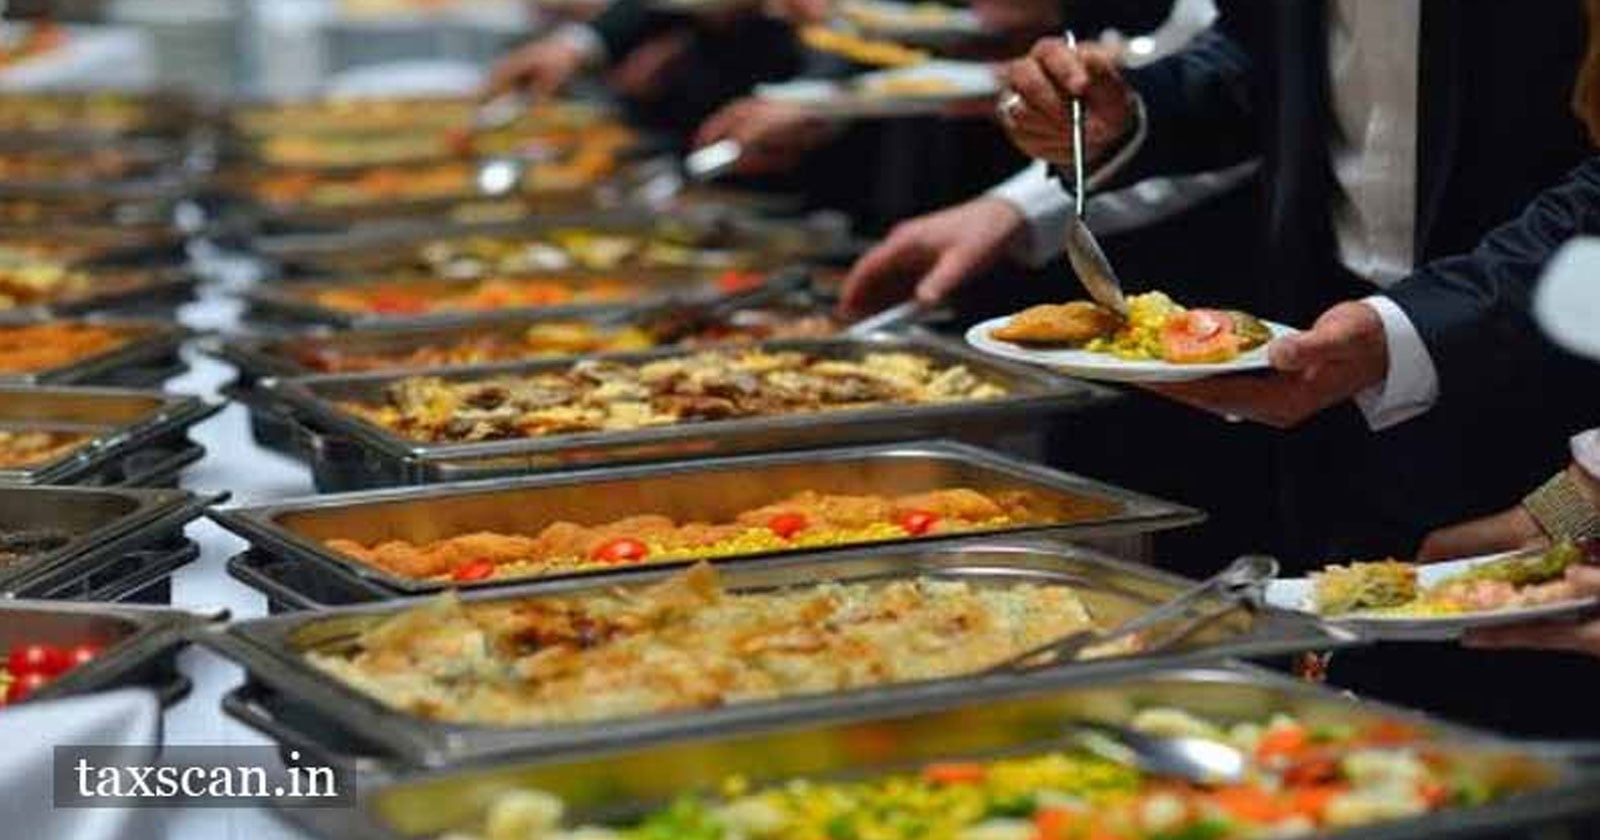 catering services - Educational Institutions - exempted from GST -AAR - taxscan